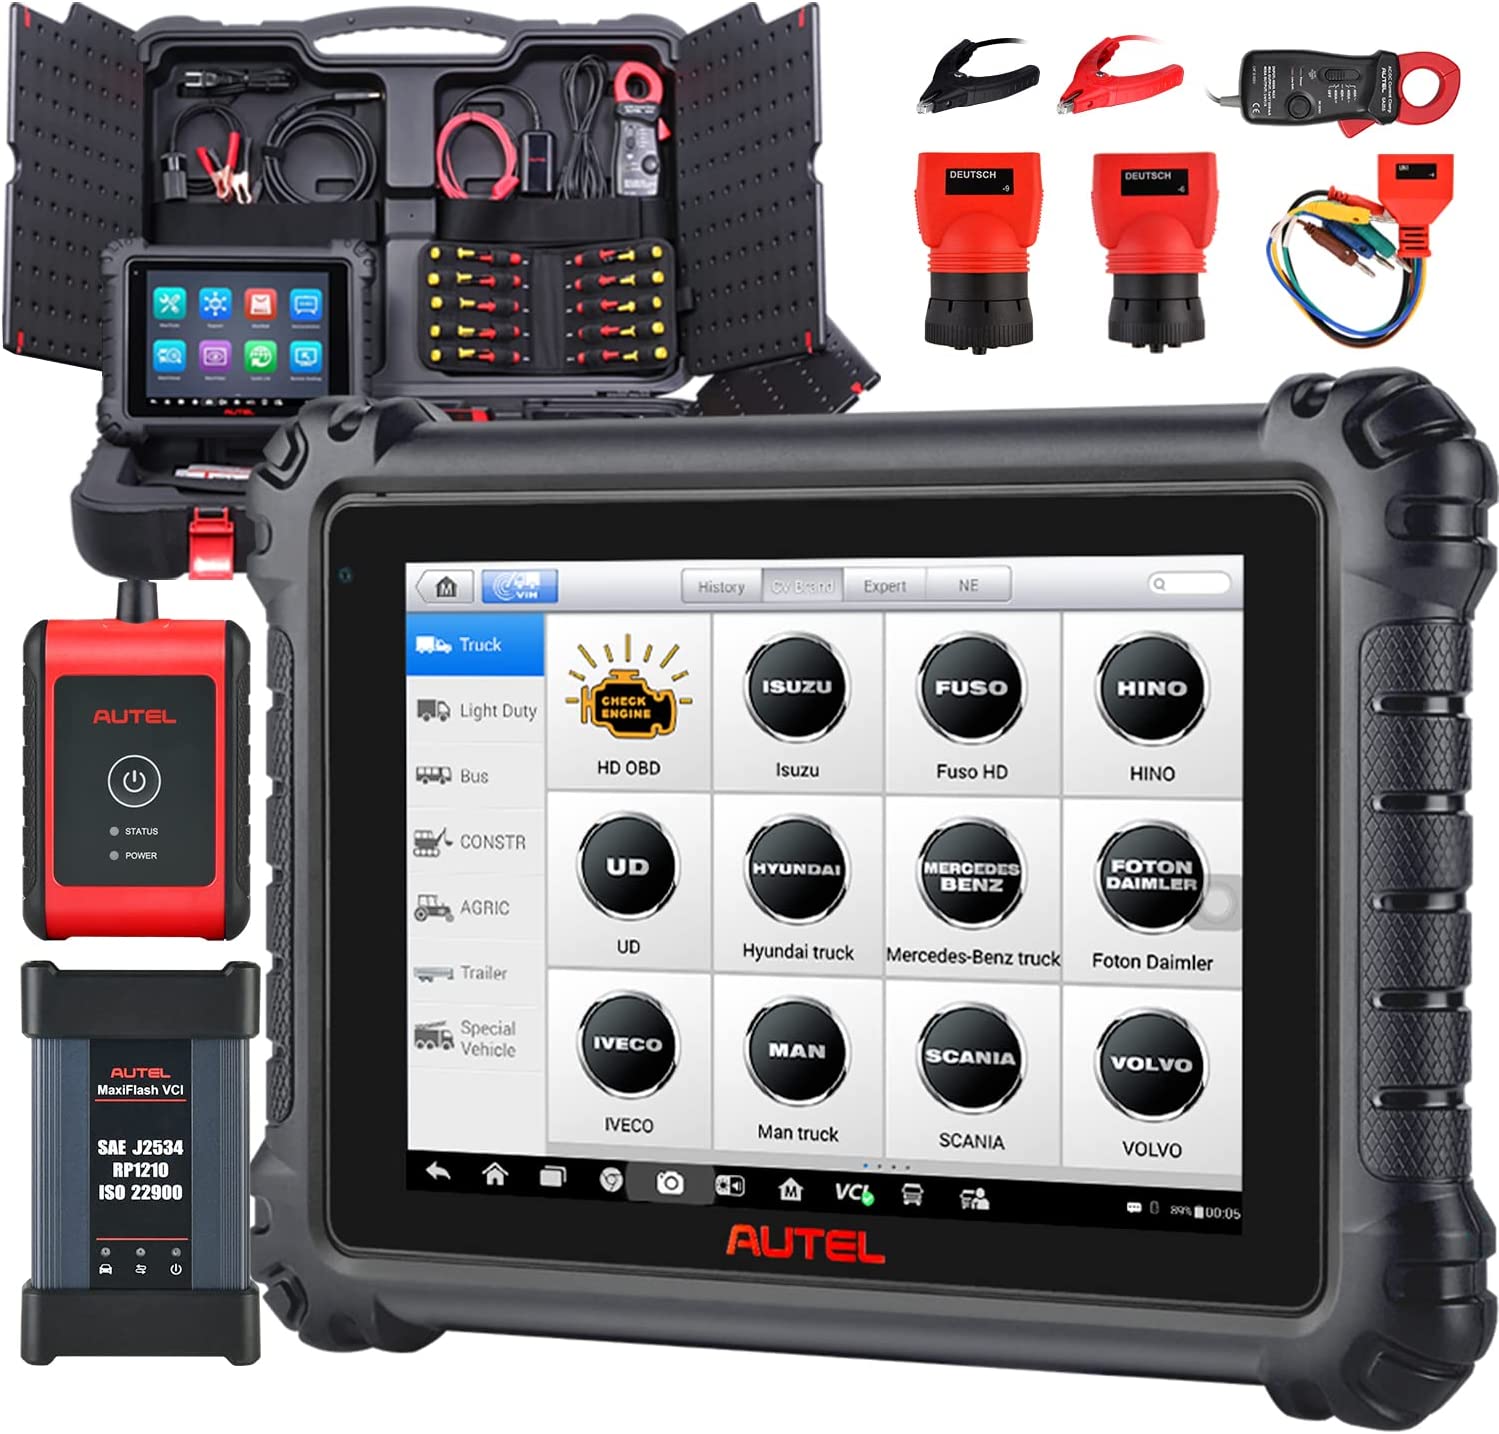 Autel MaxiSys MS909CV: Top Diagnostic Tool for Heavy Duty Truck –